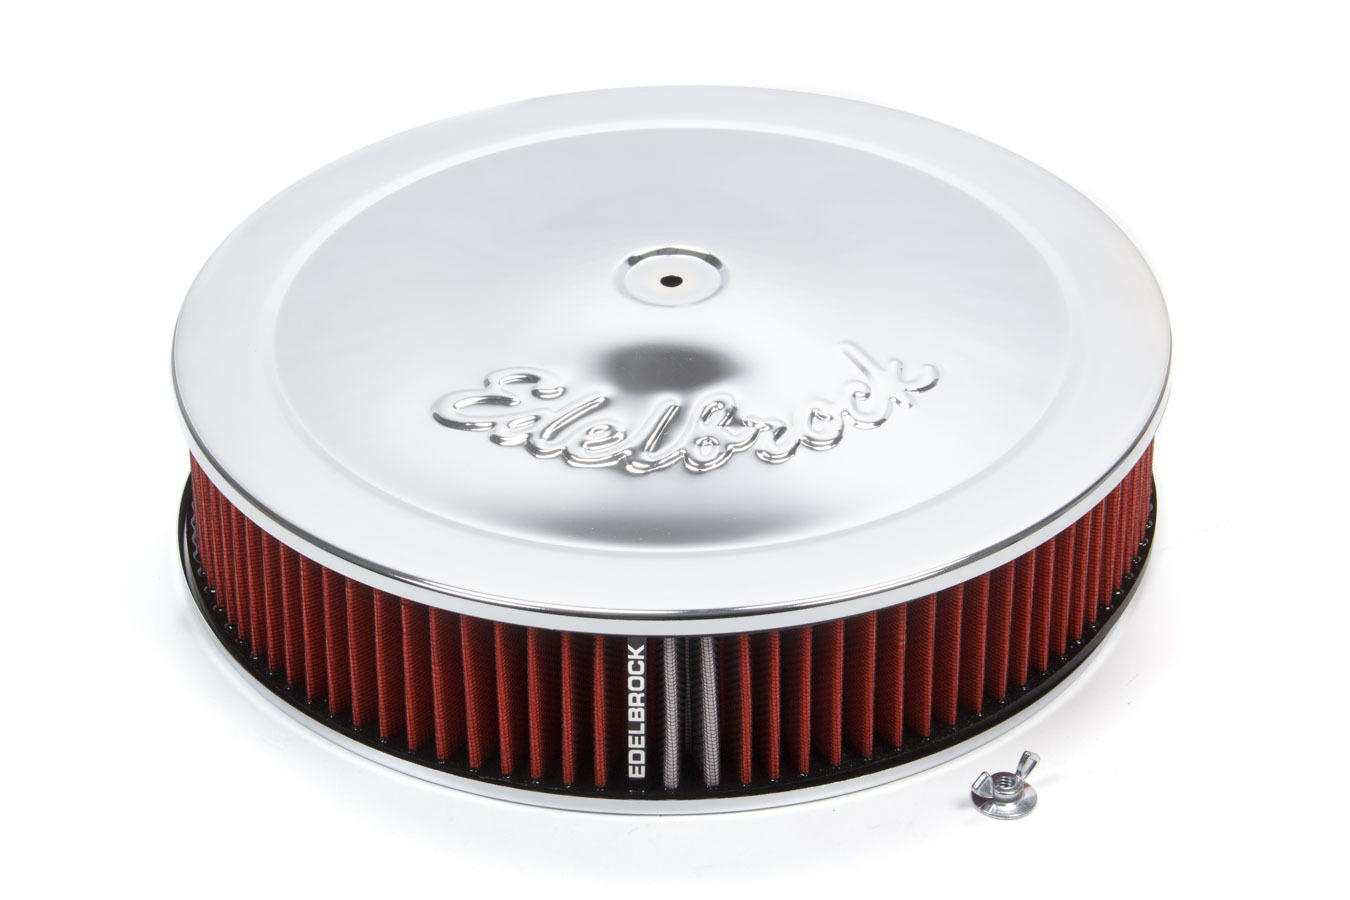 Edelbrock 1206 Air Cleaner Assembly, Pro-Flo, 14 in Round, 3 in Tall, 5-1/8 in Carb Flange, Raised Base, Steel, Cotton, Chrome, Kit